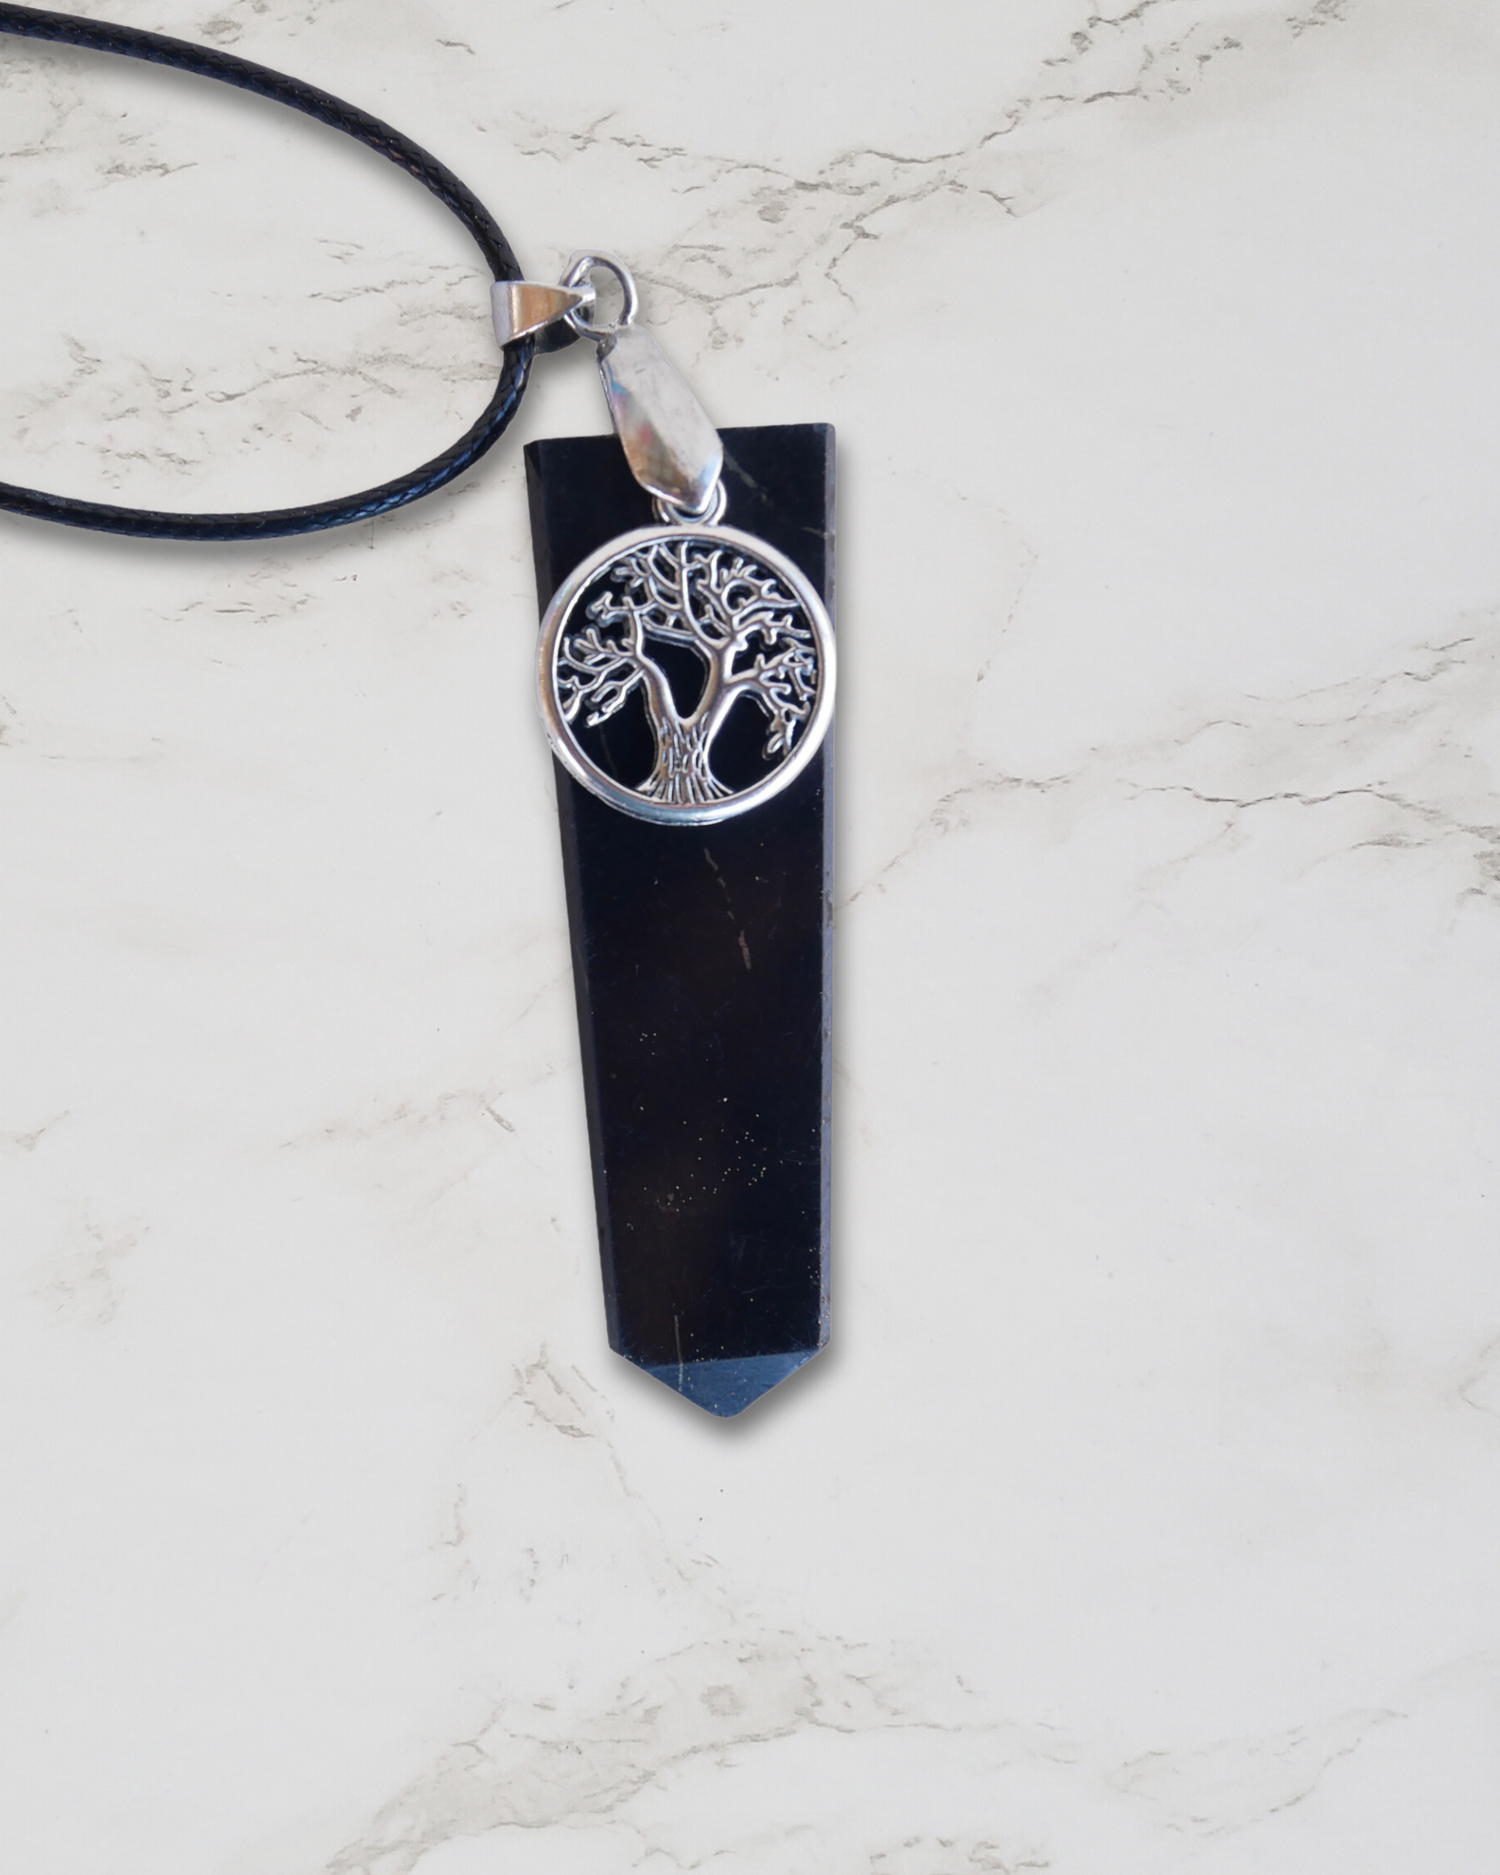 Frequency Jewelry Natural Pain Relief and Protection from 5G and EMFs Shungite Pendant Necklace with Tree of Life Charm